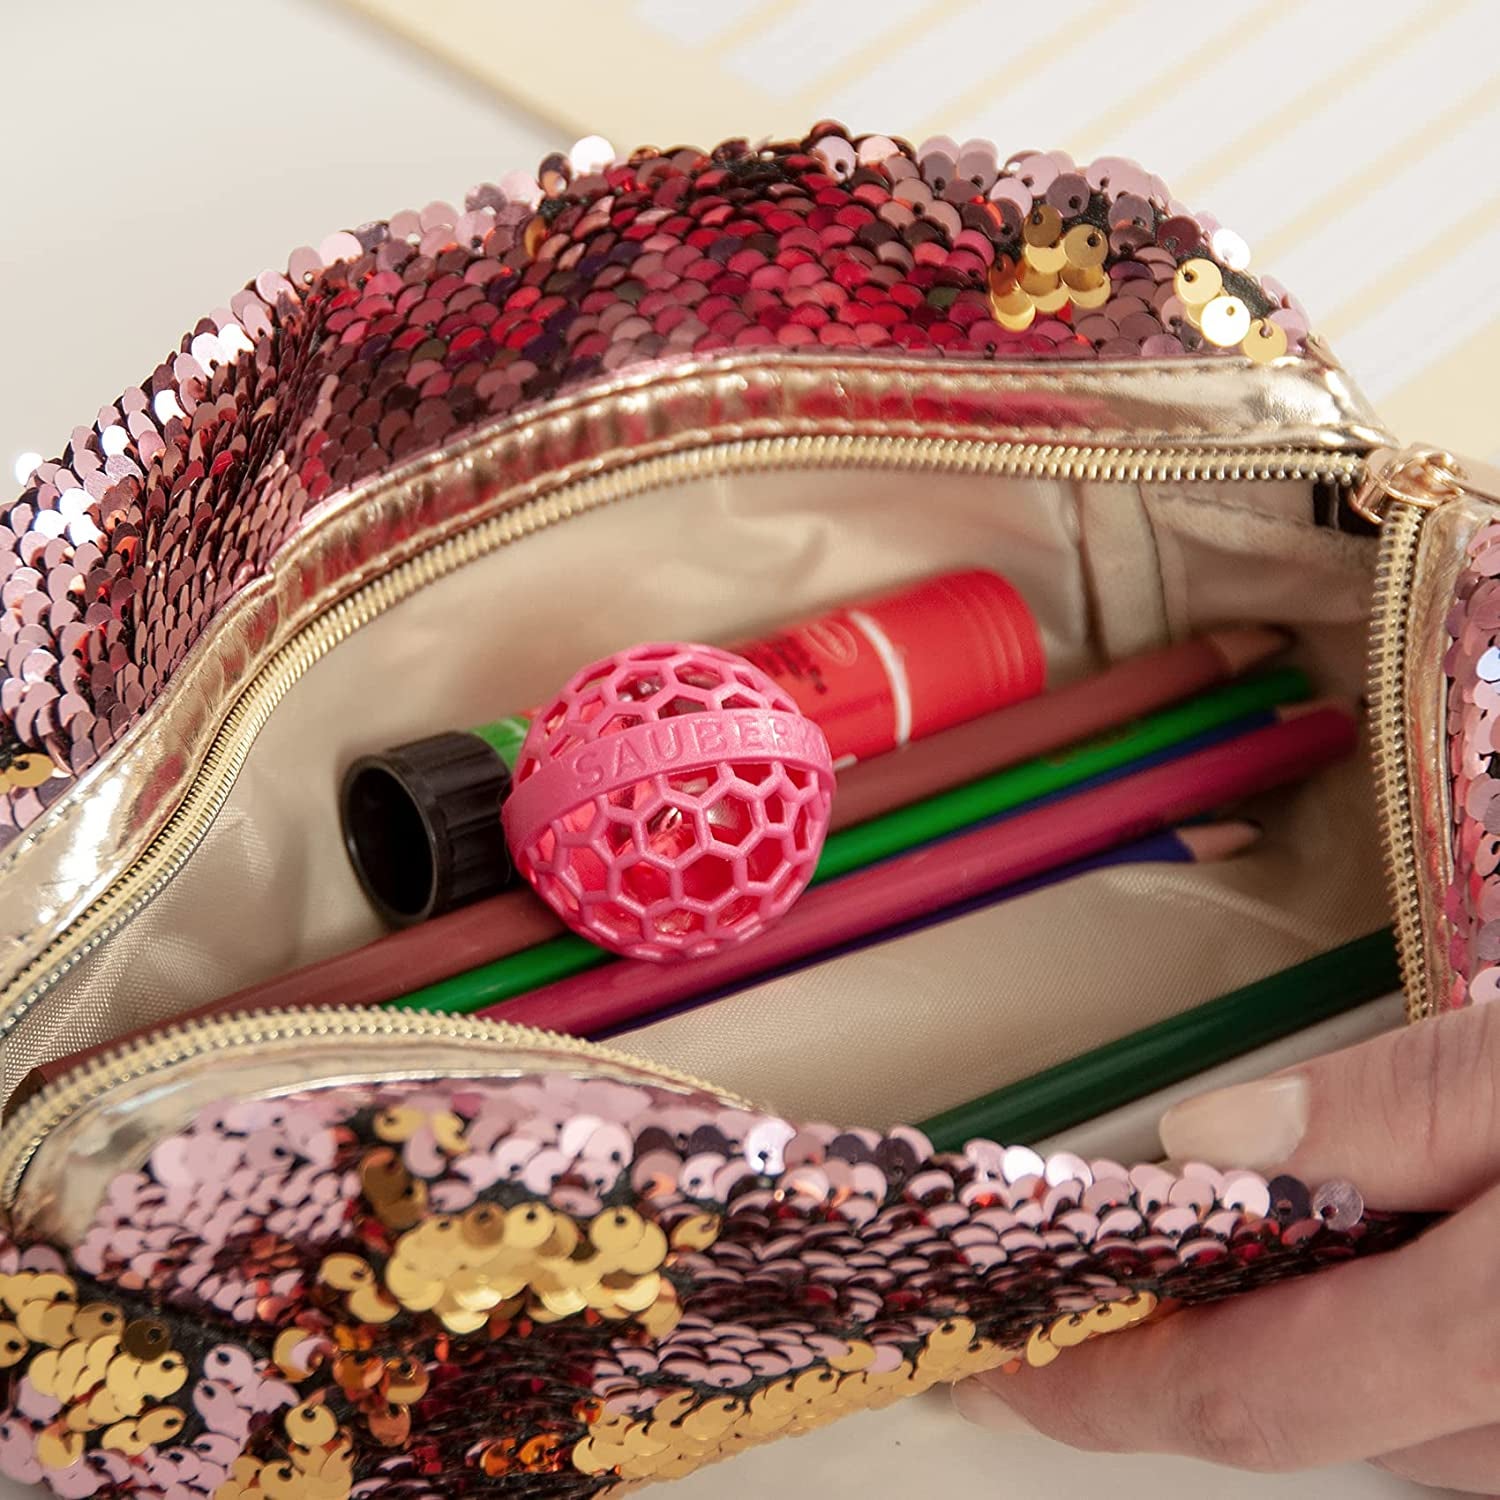 10 things to KEEP in your purse - Your Modern Family